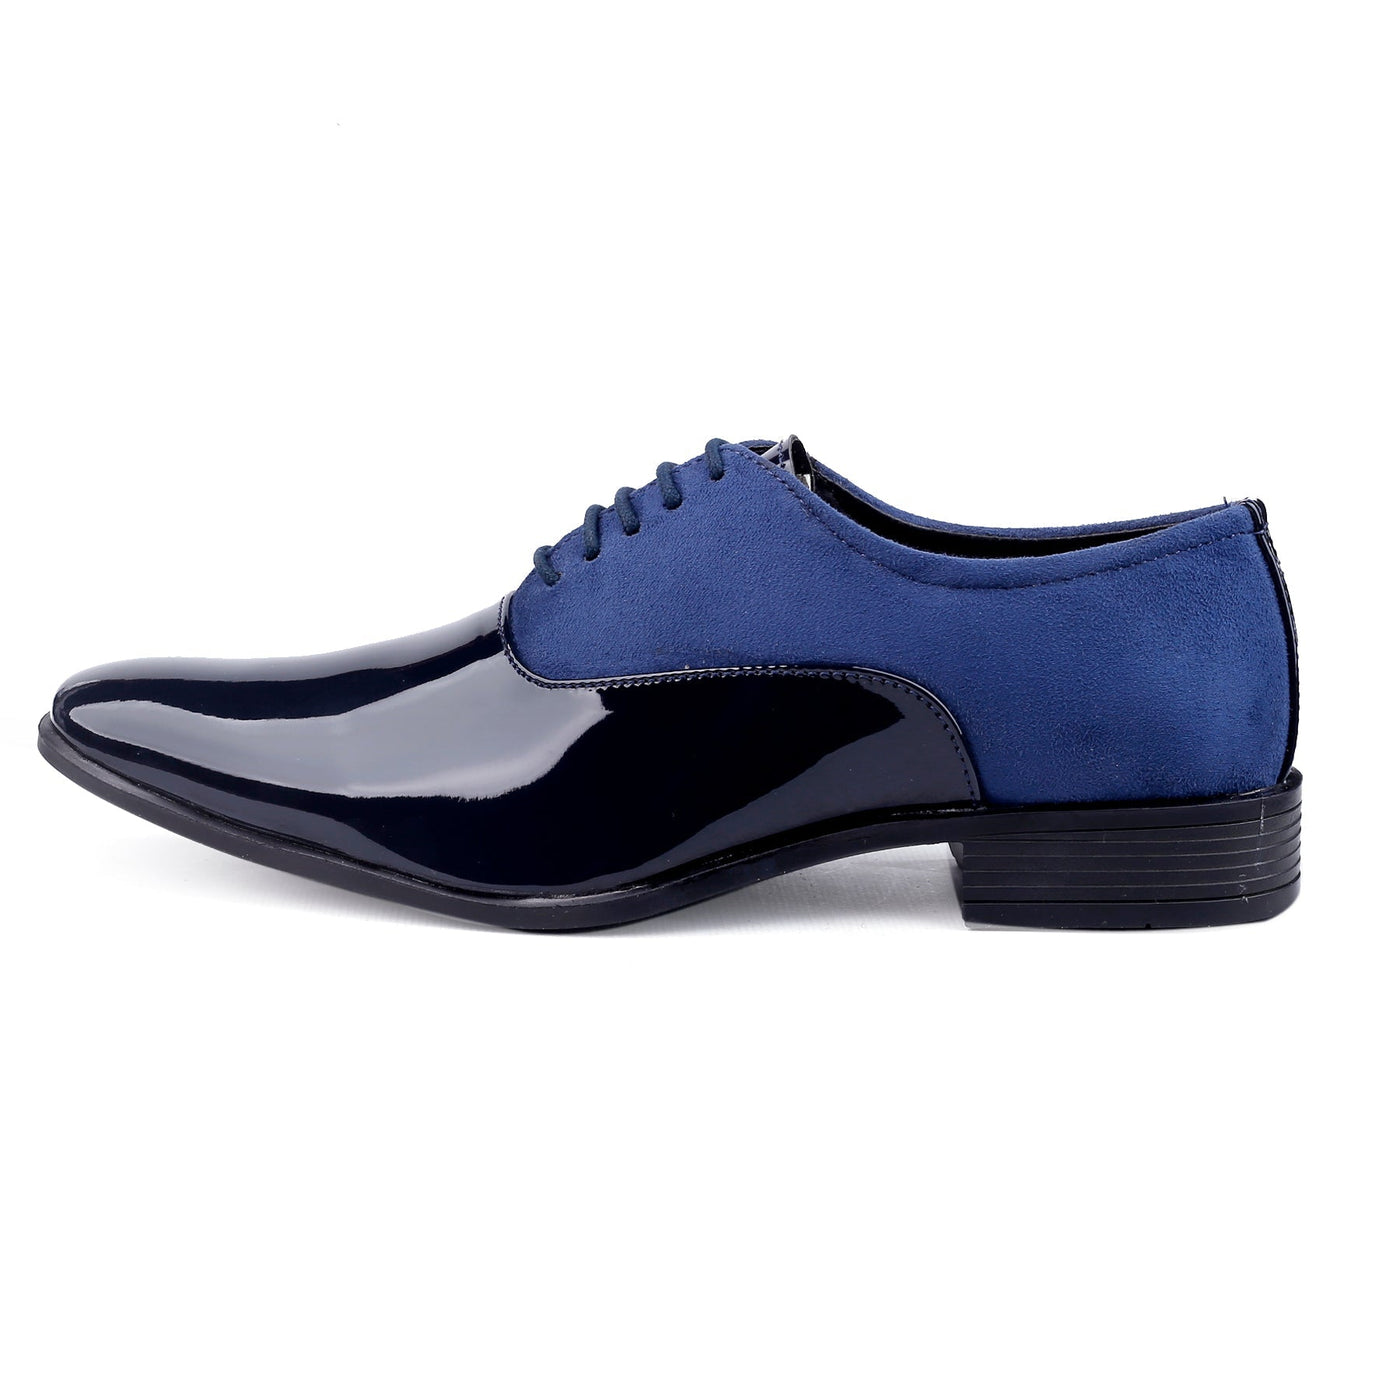 Classy Office,Wedding,Party Wear Blue Shoes With Lace-Up For All Season-Unique and Classy